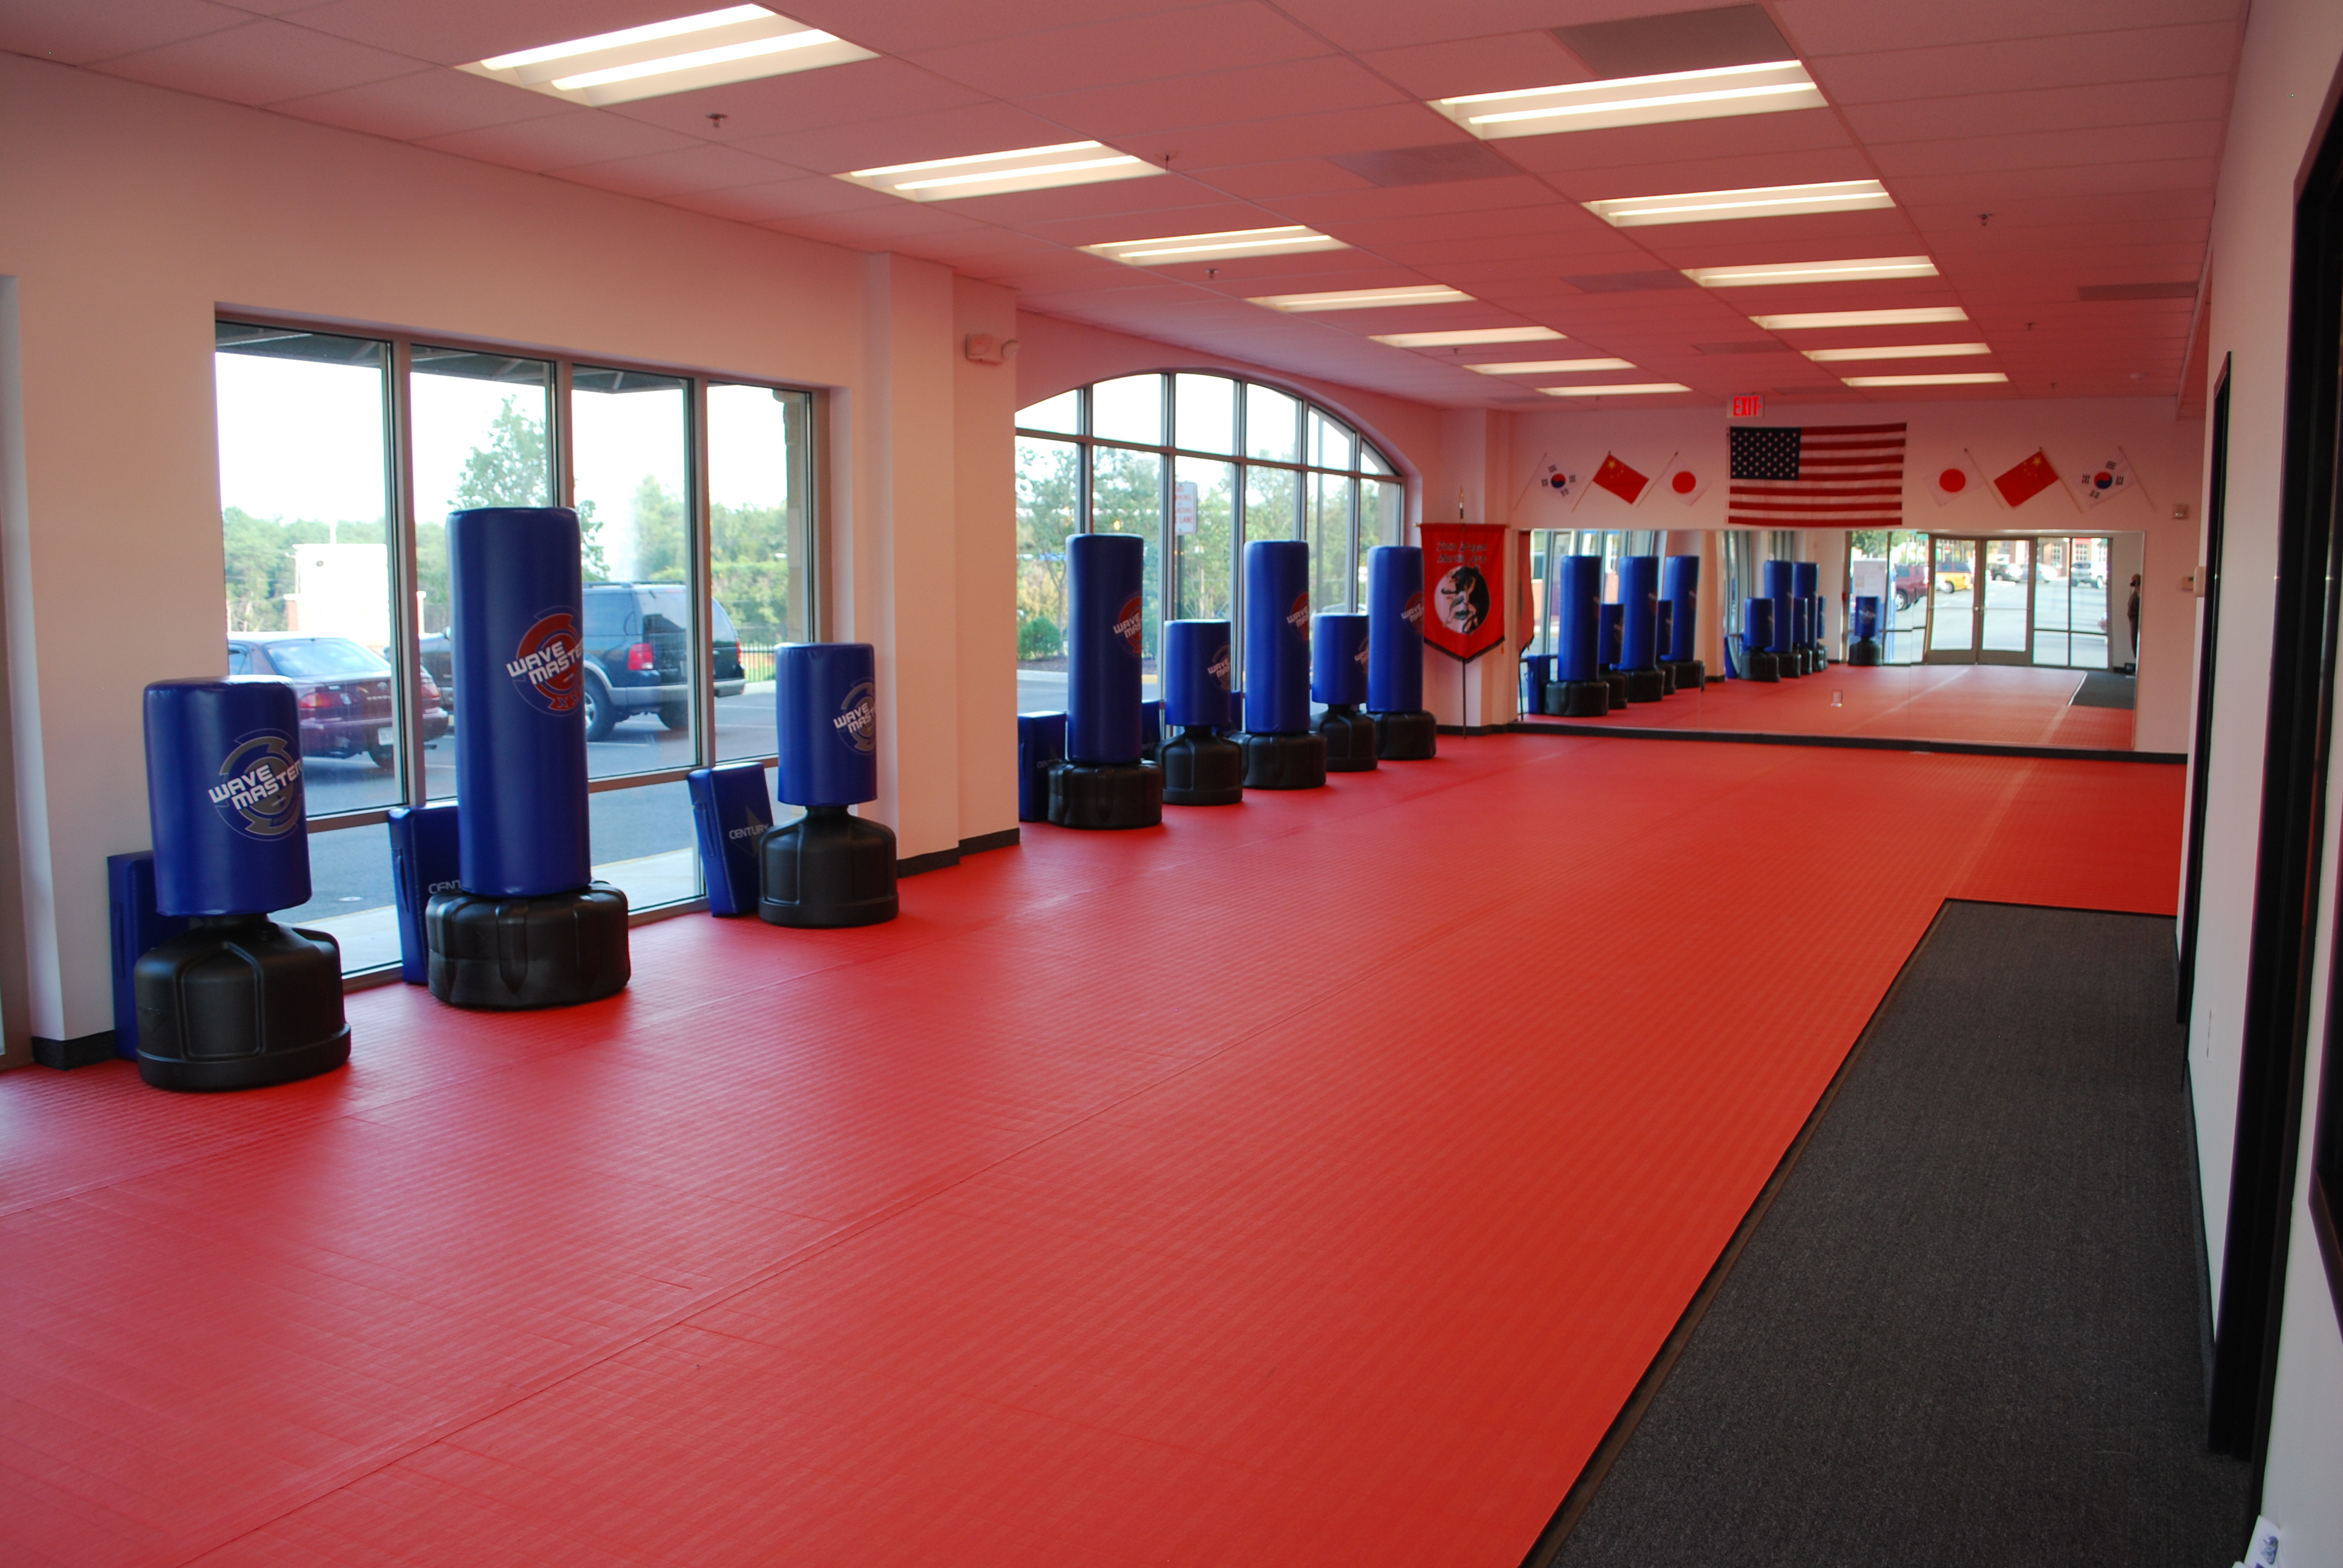 Twin Dragon Martial Arts Coupons near me in Gainesville, VA 20155 | 8coupons